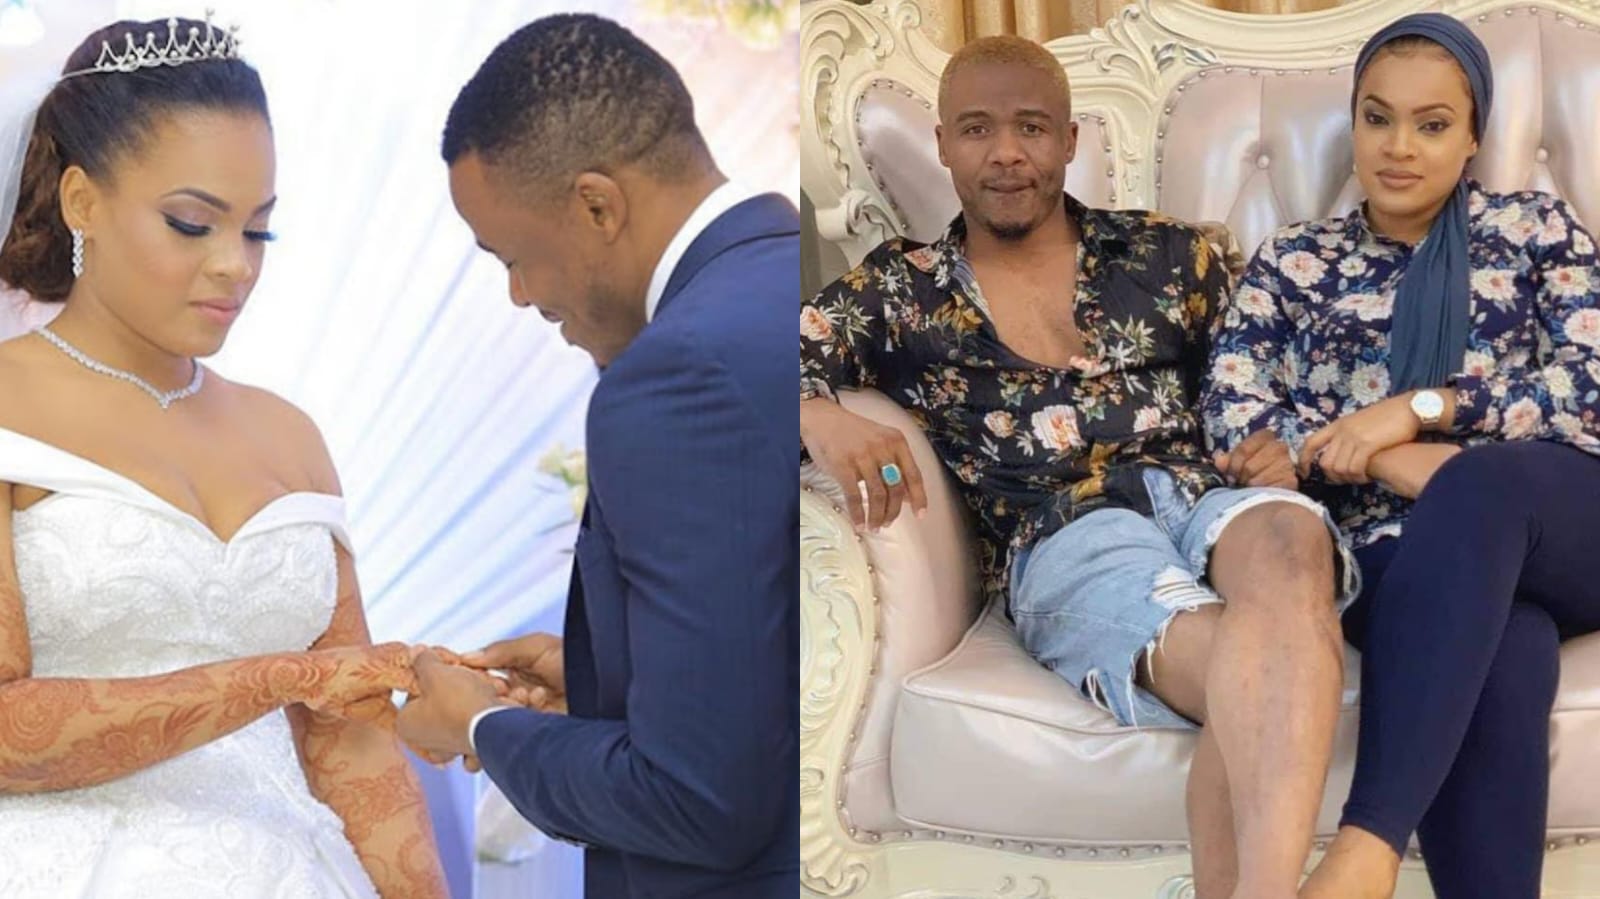 Why Ali Kiba refused to sign the divorce papers from his Kenyan wife